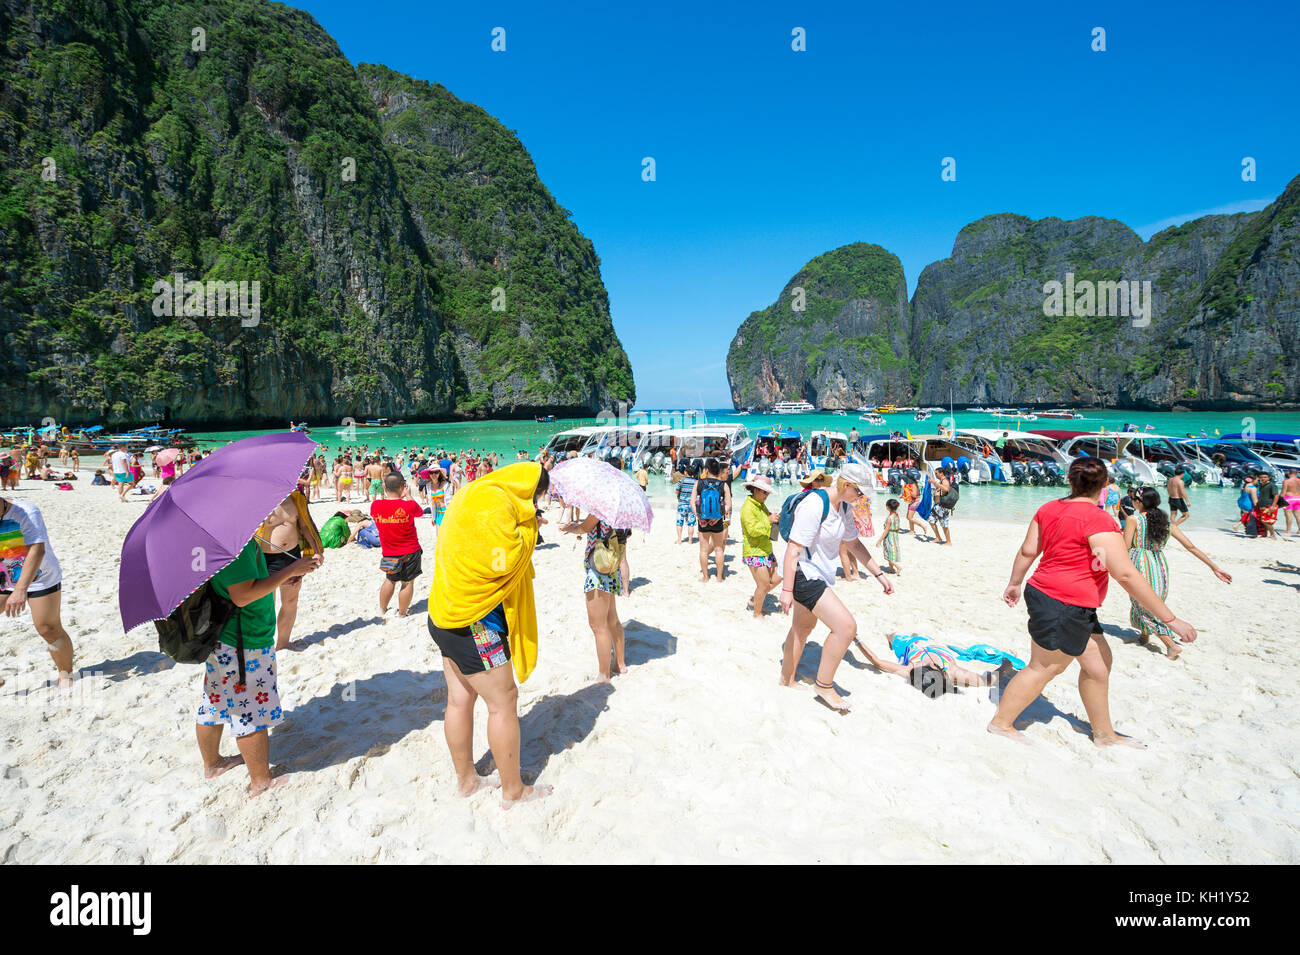 MAYA BAY, THAILAND - NOVEMBER 12, 2014: Crowds of sunbathing visitors enjoy a day trip boat ride to Maya Bay, one of the iconic beaches of Southern Th Stock Photo